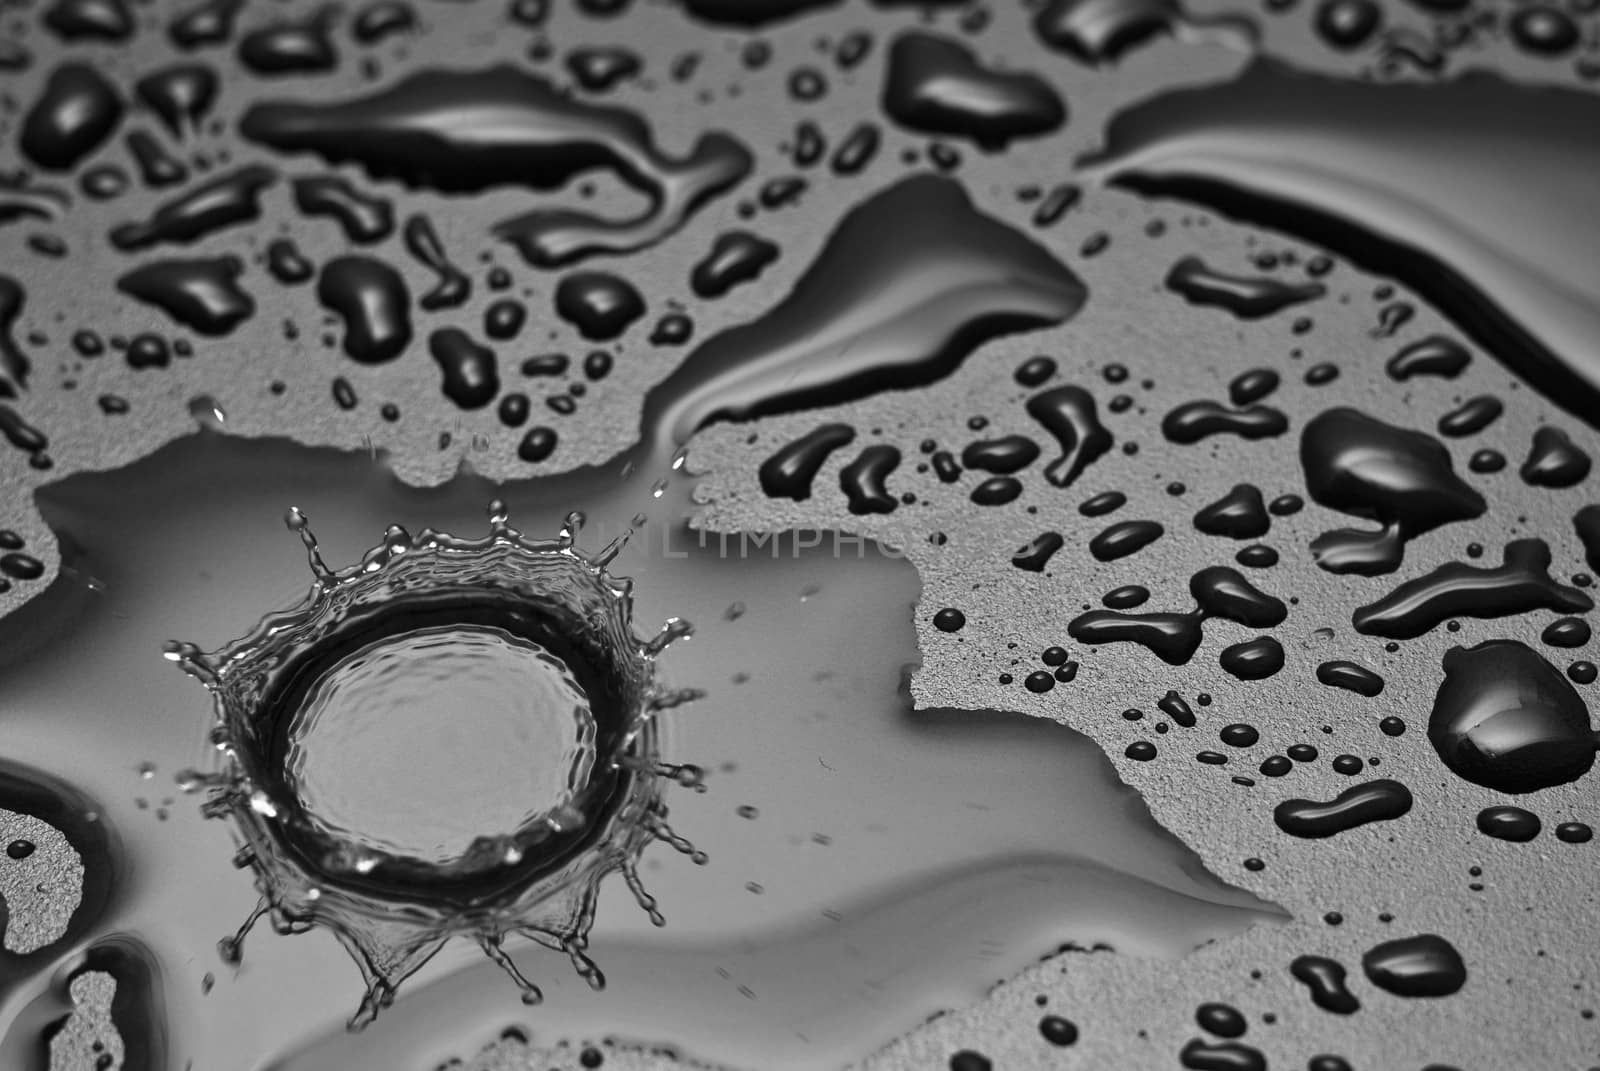 A water drop forms a crown as it splashes into a pool of water.